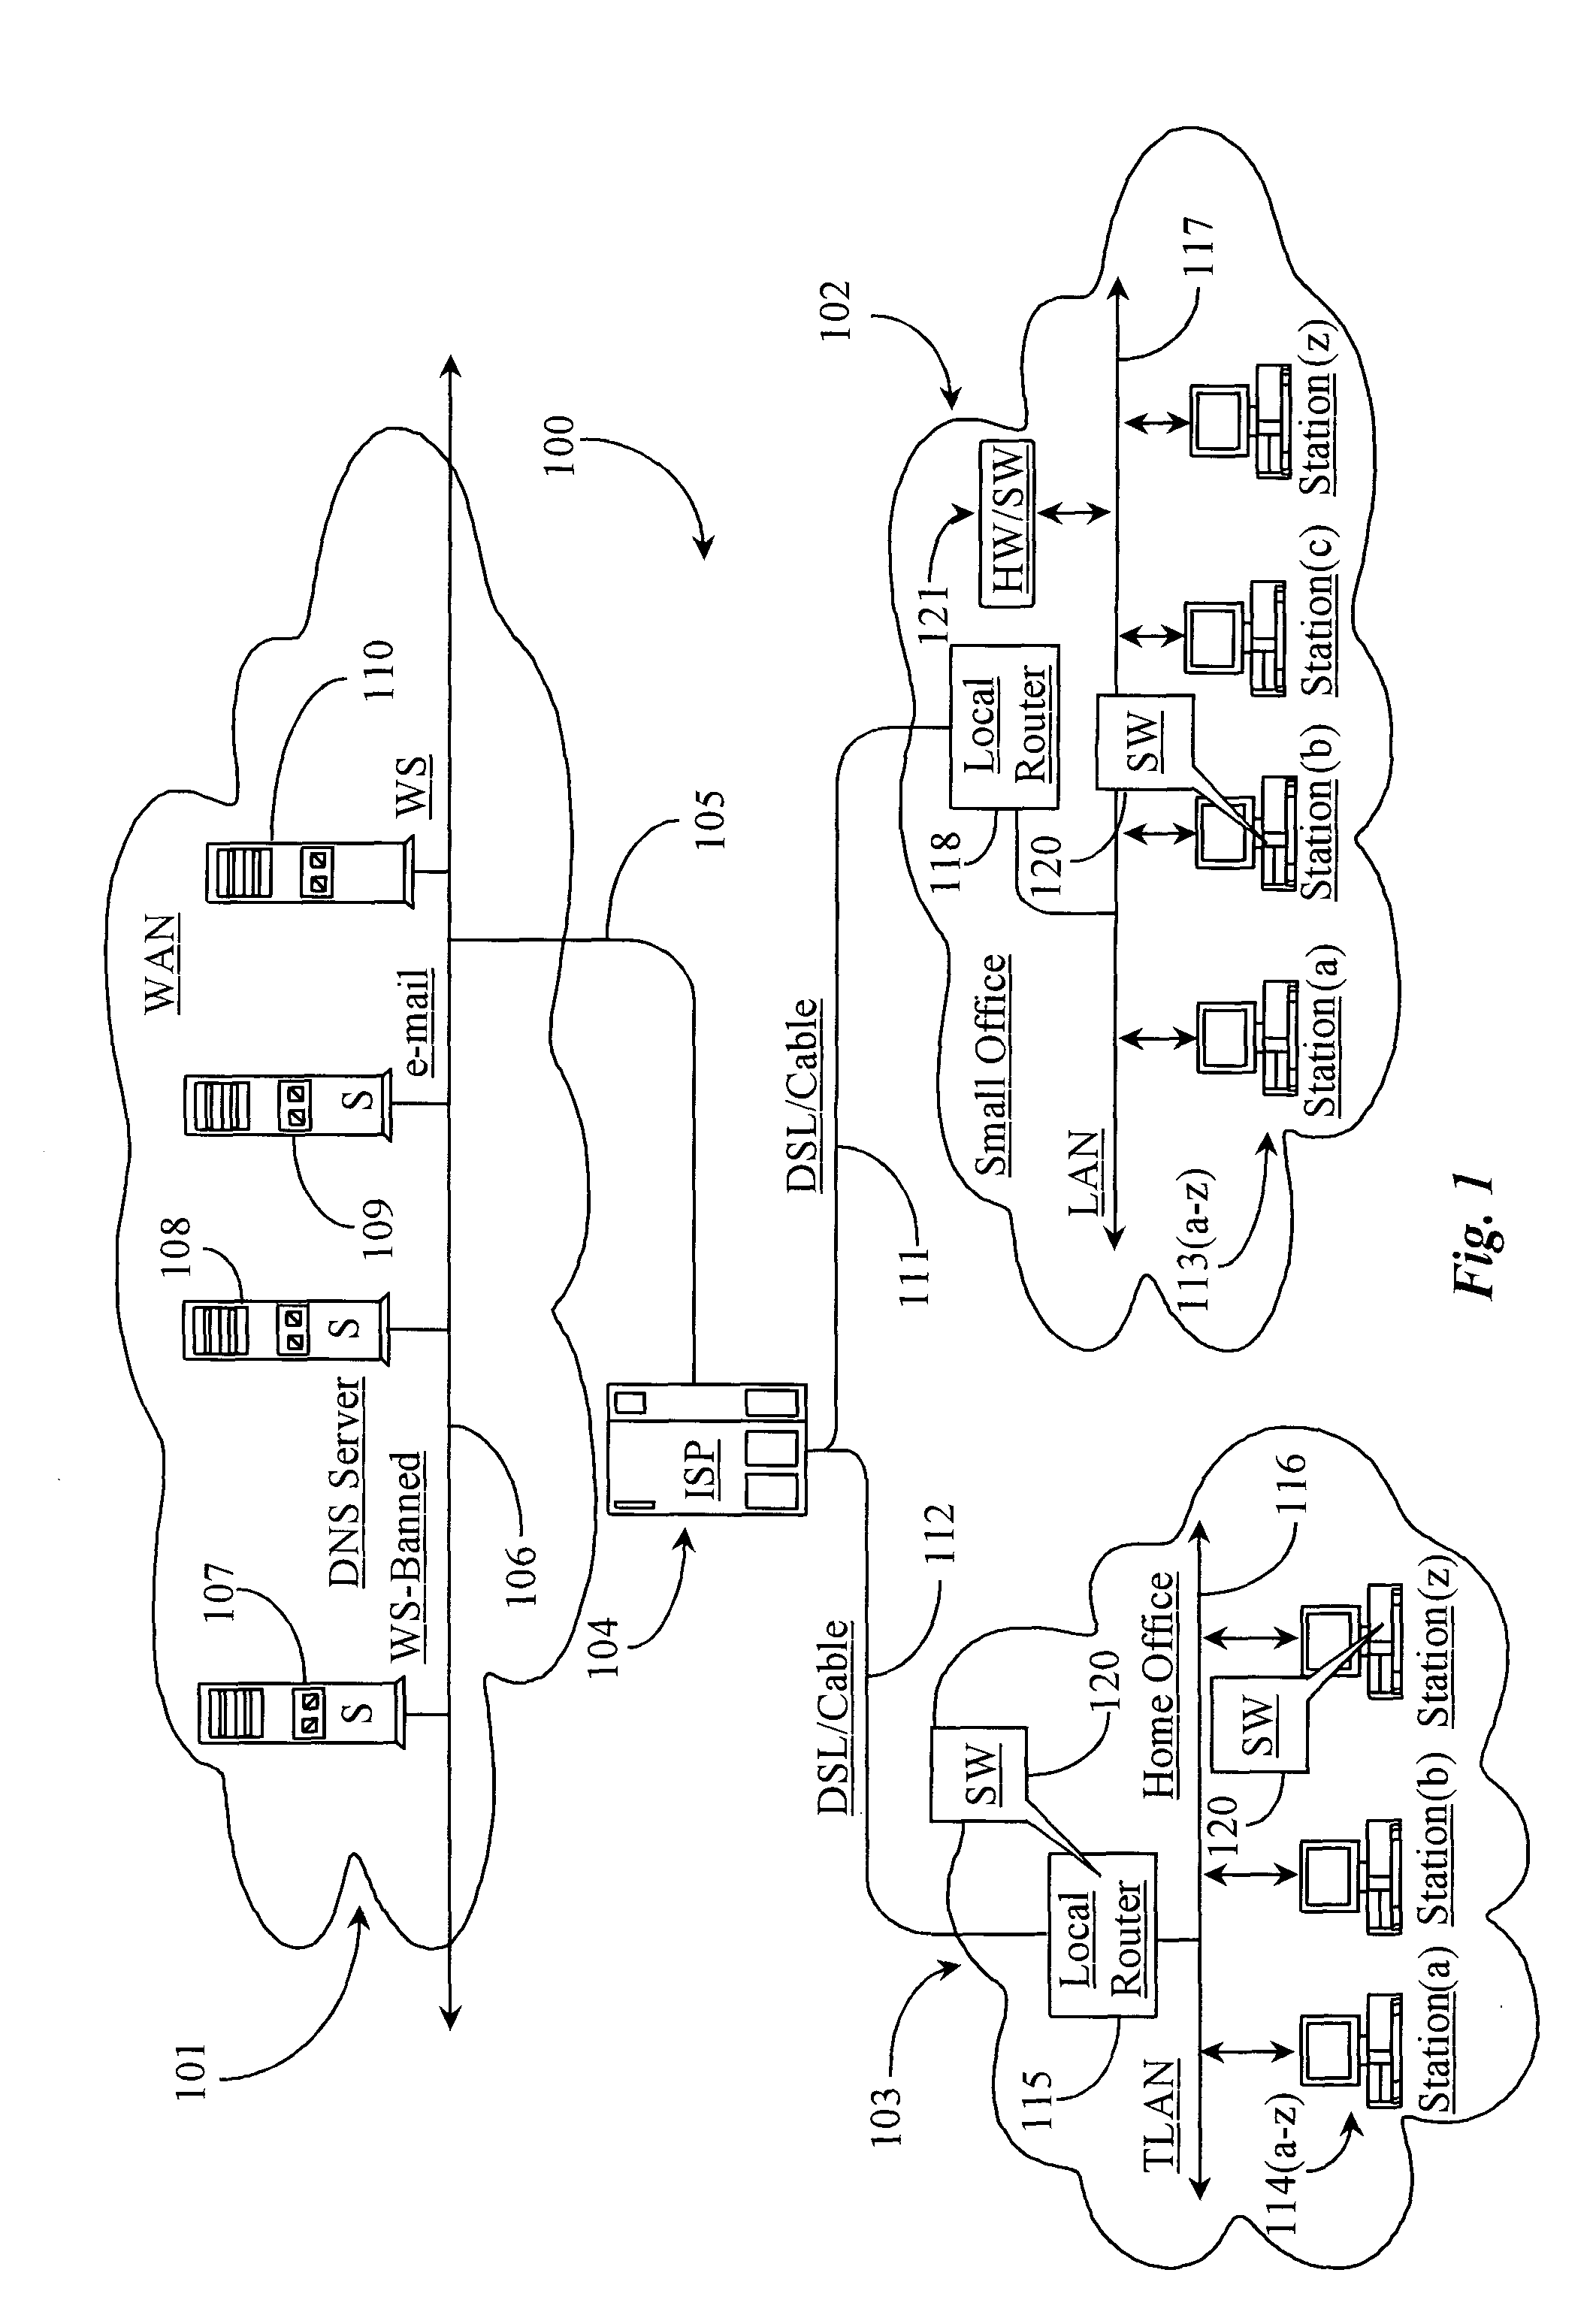 Methods and apparatus for monitoring local network traffic on local network segments and resolving detected security and network management problems occurring on those segments